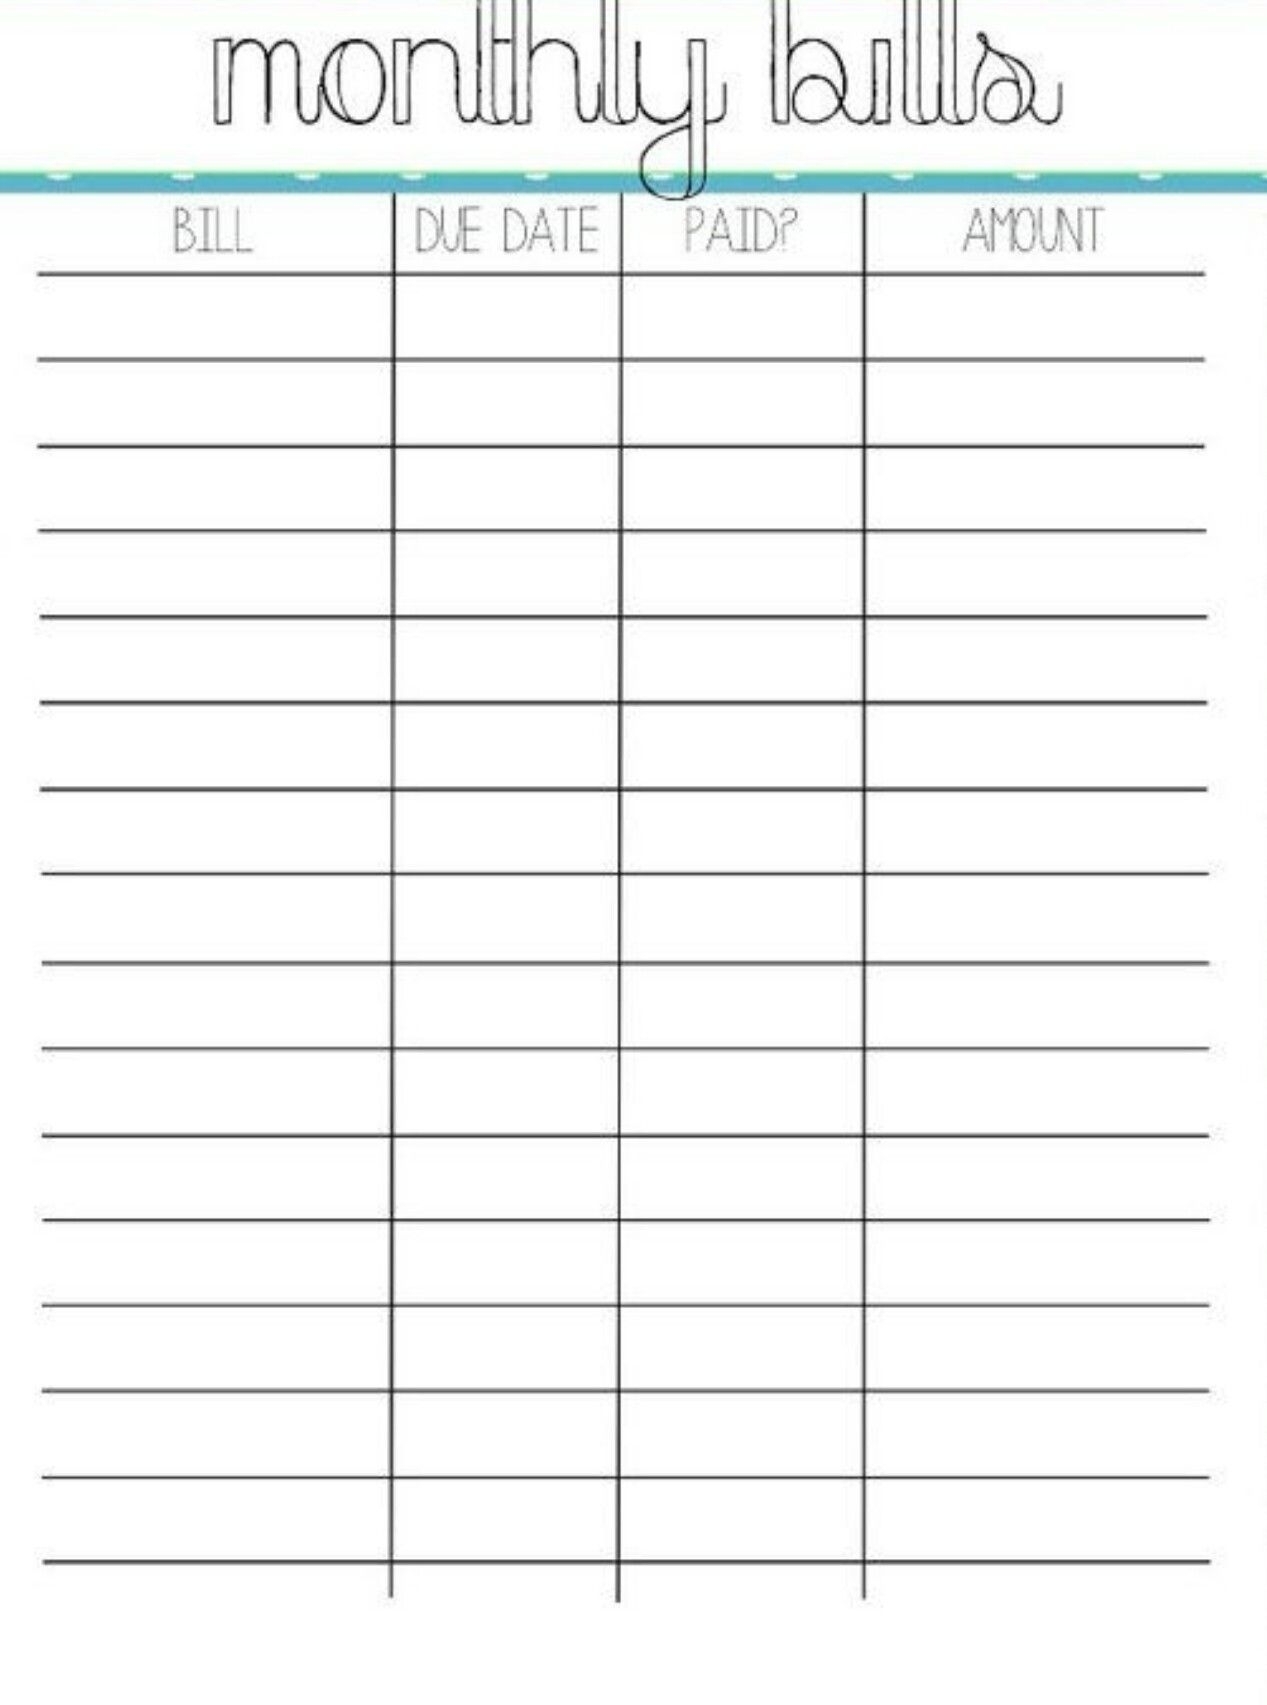 Take Free Printable Monthly Bill Chart